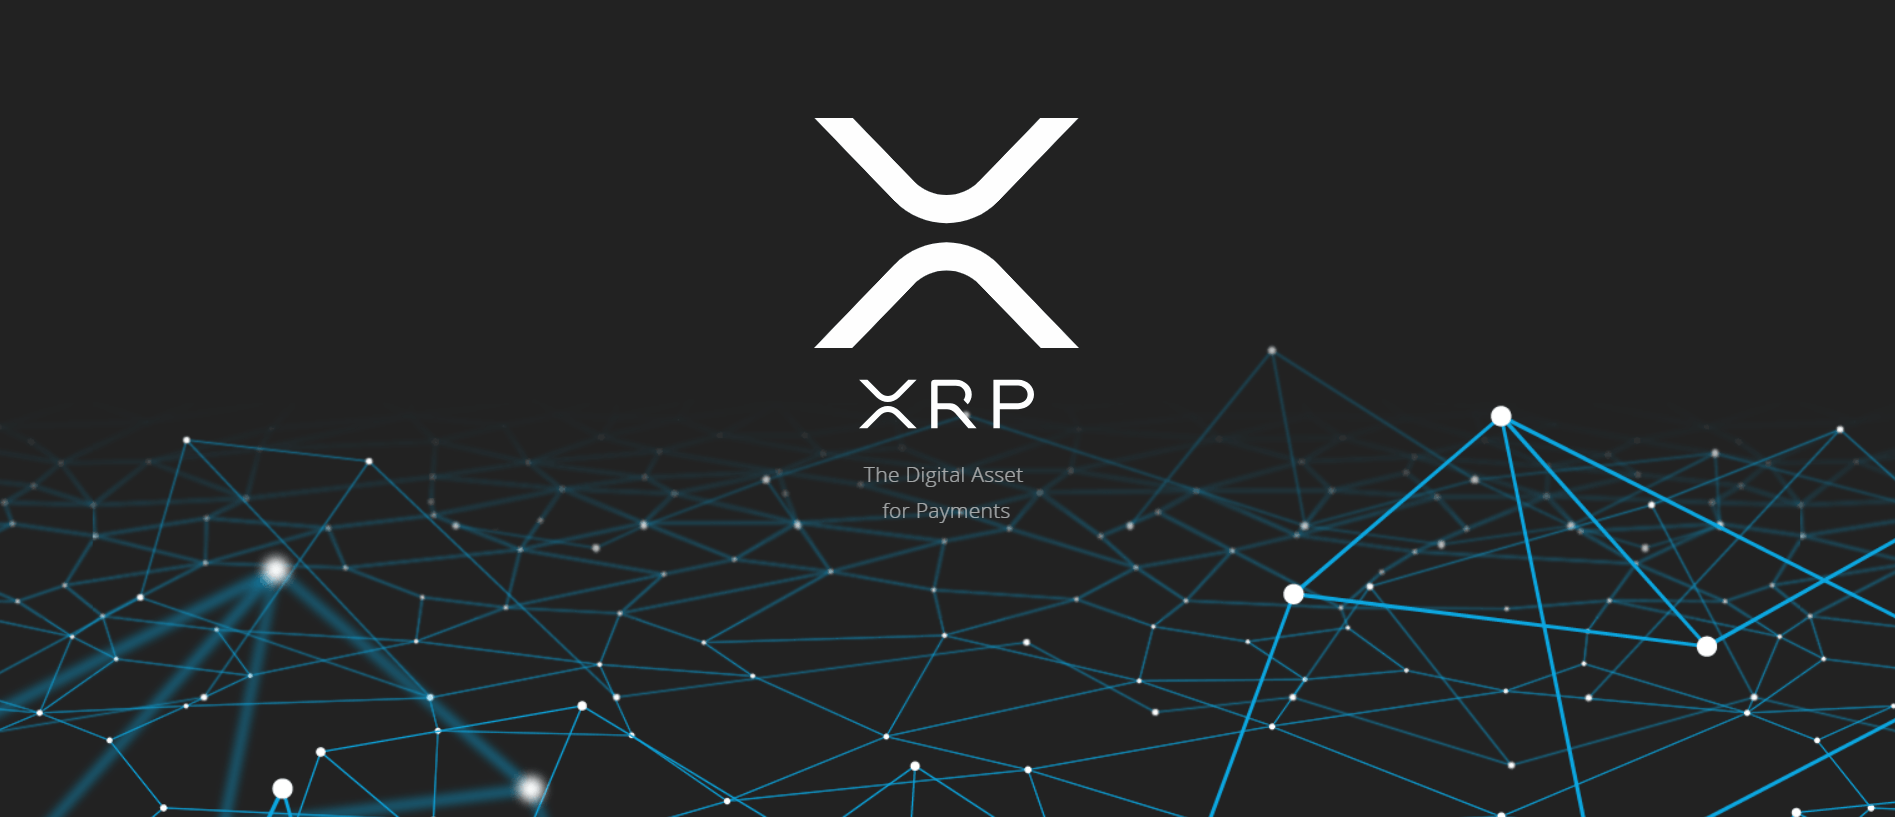 Stellar XLM or Ripple XRP: what crypto should you invest in? - TabStocks